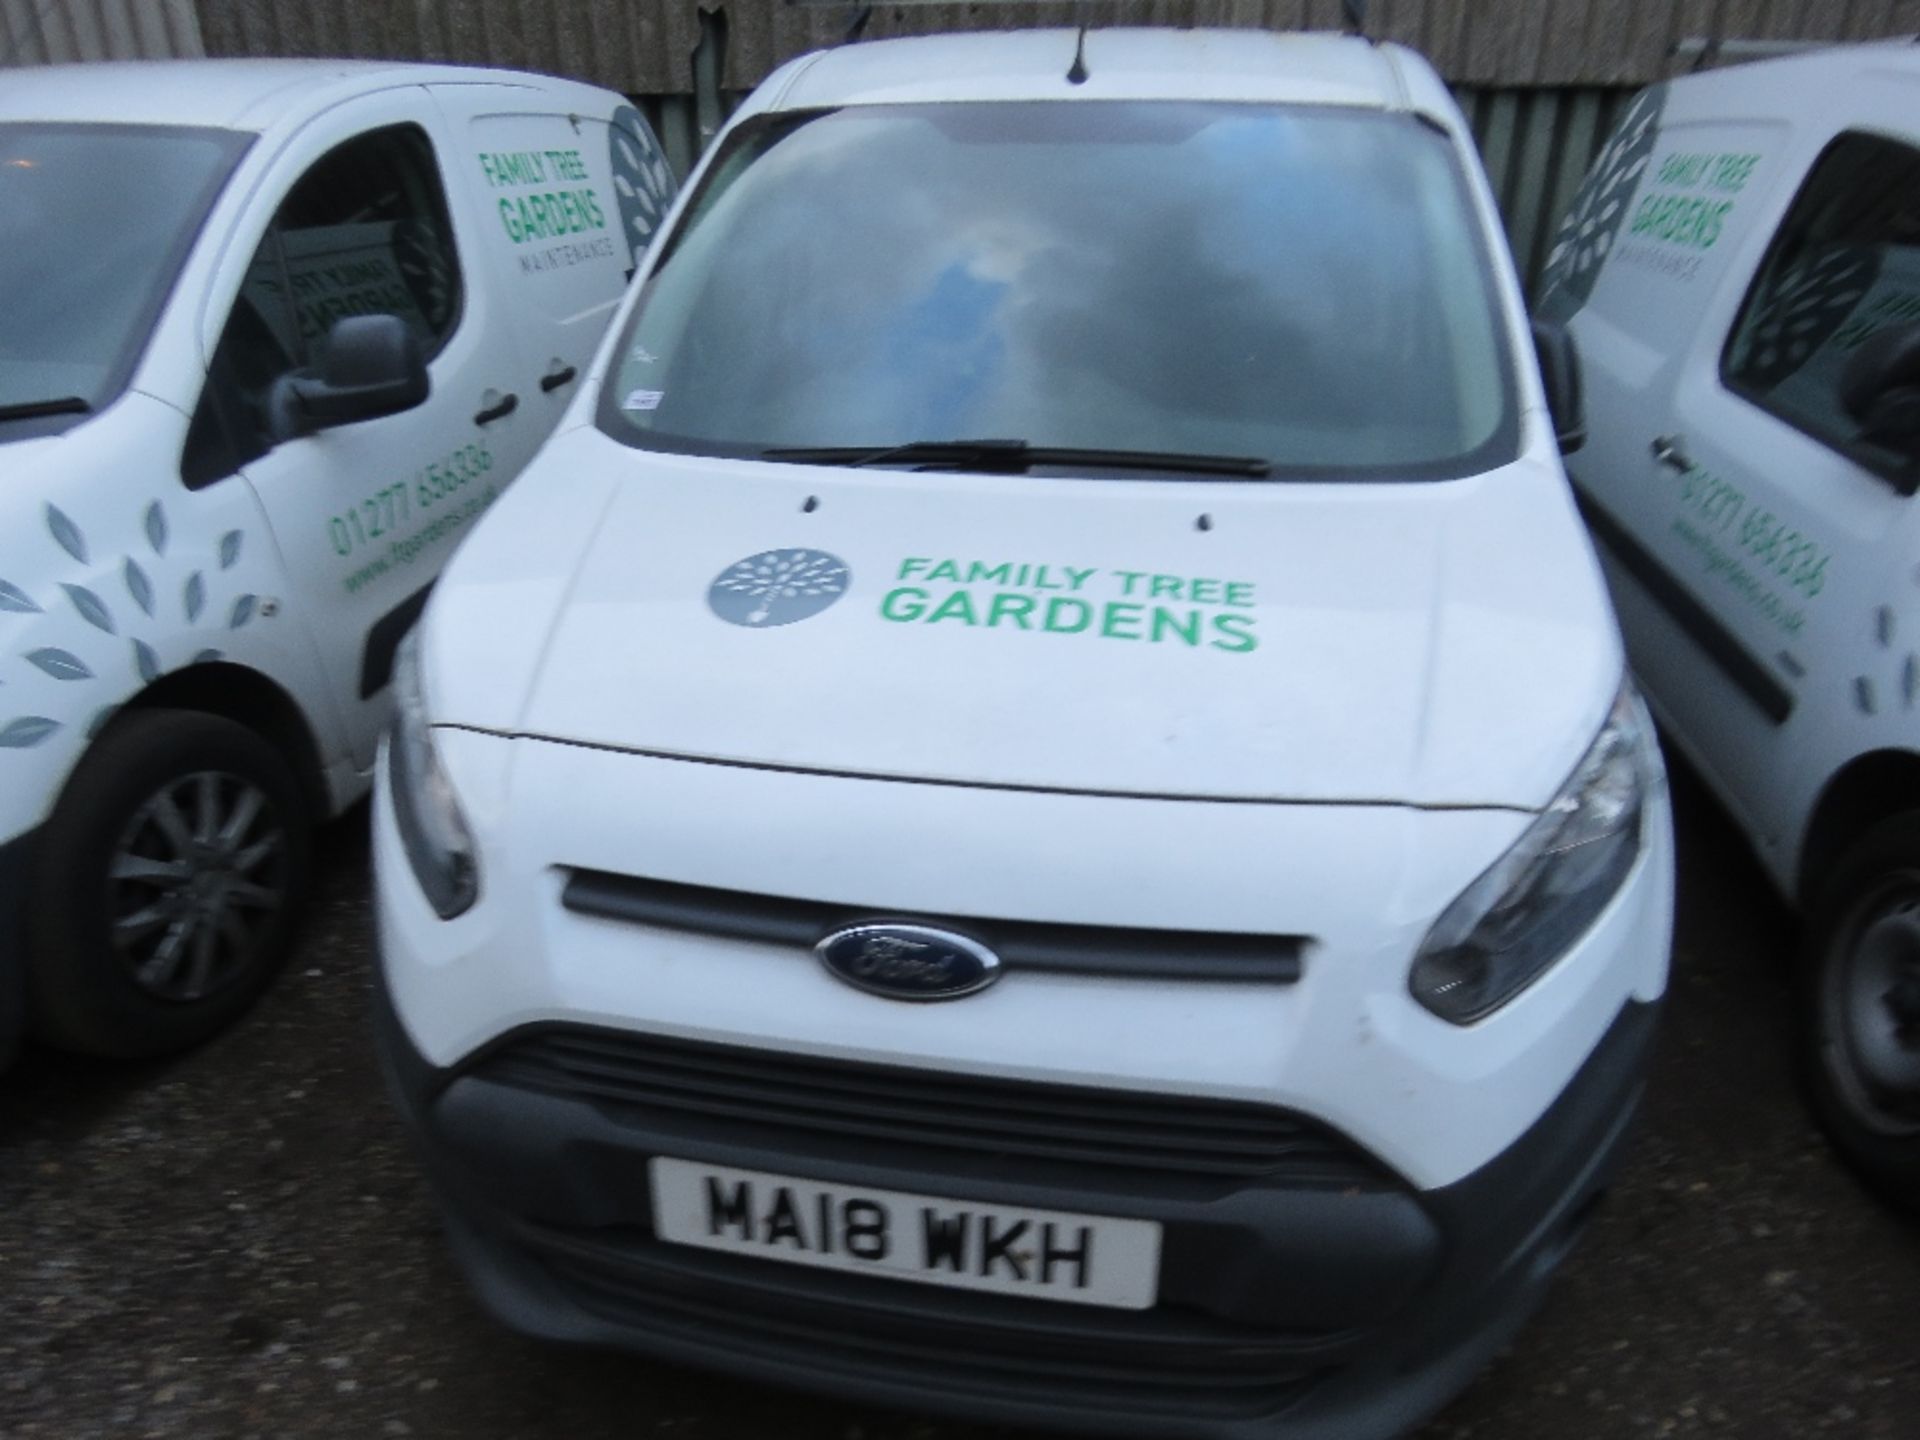 FORD TRANSIT CONNECT PANEL VAN REG:MA18 WKH WITH V5 (TEST RECENTLY EXPIRED), EUR0 6. 2 KEYS. 99,765 - Image 2 of 13